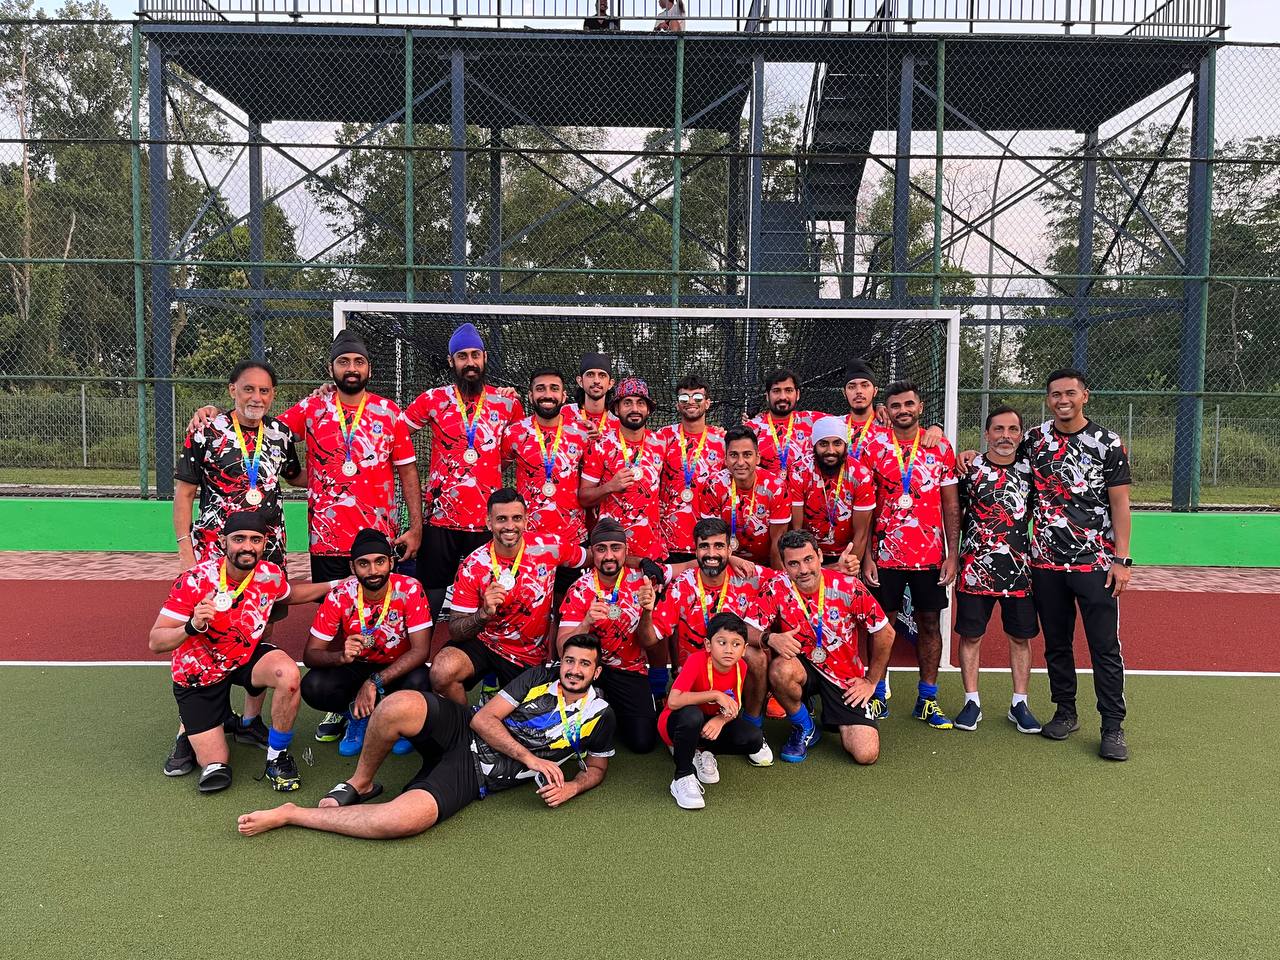 Singapore humbled by rivals as they settled for silver in the 71st Gurdwara Cup